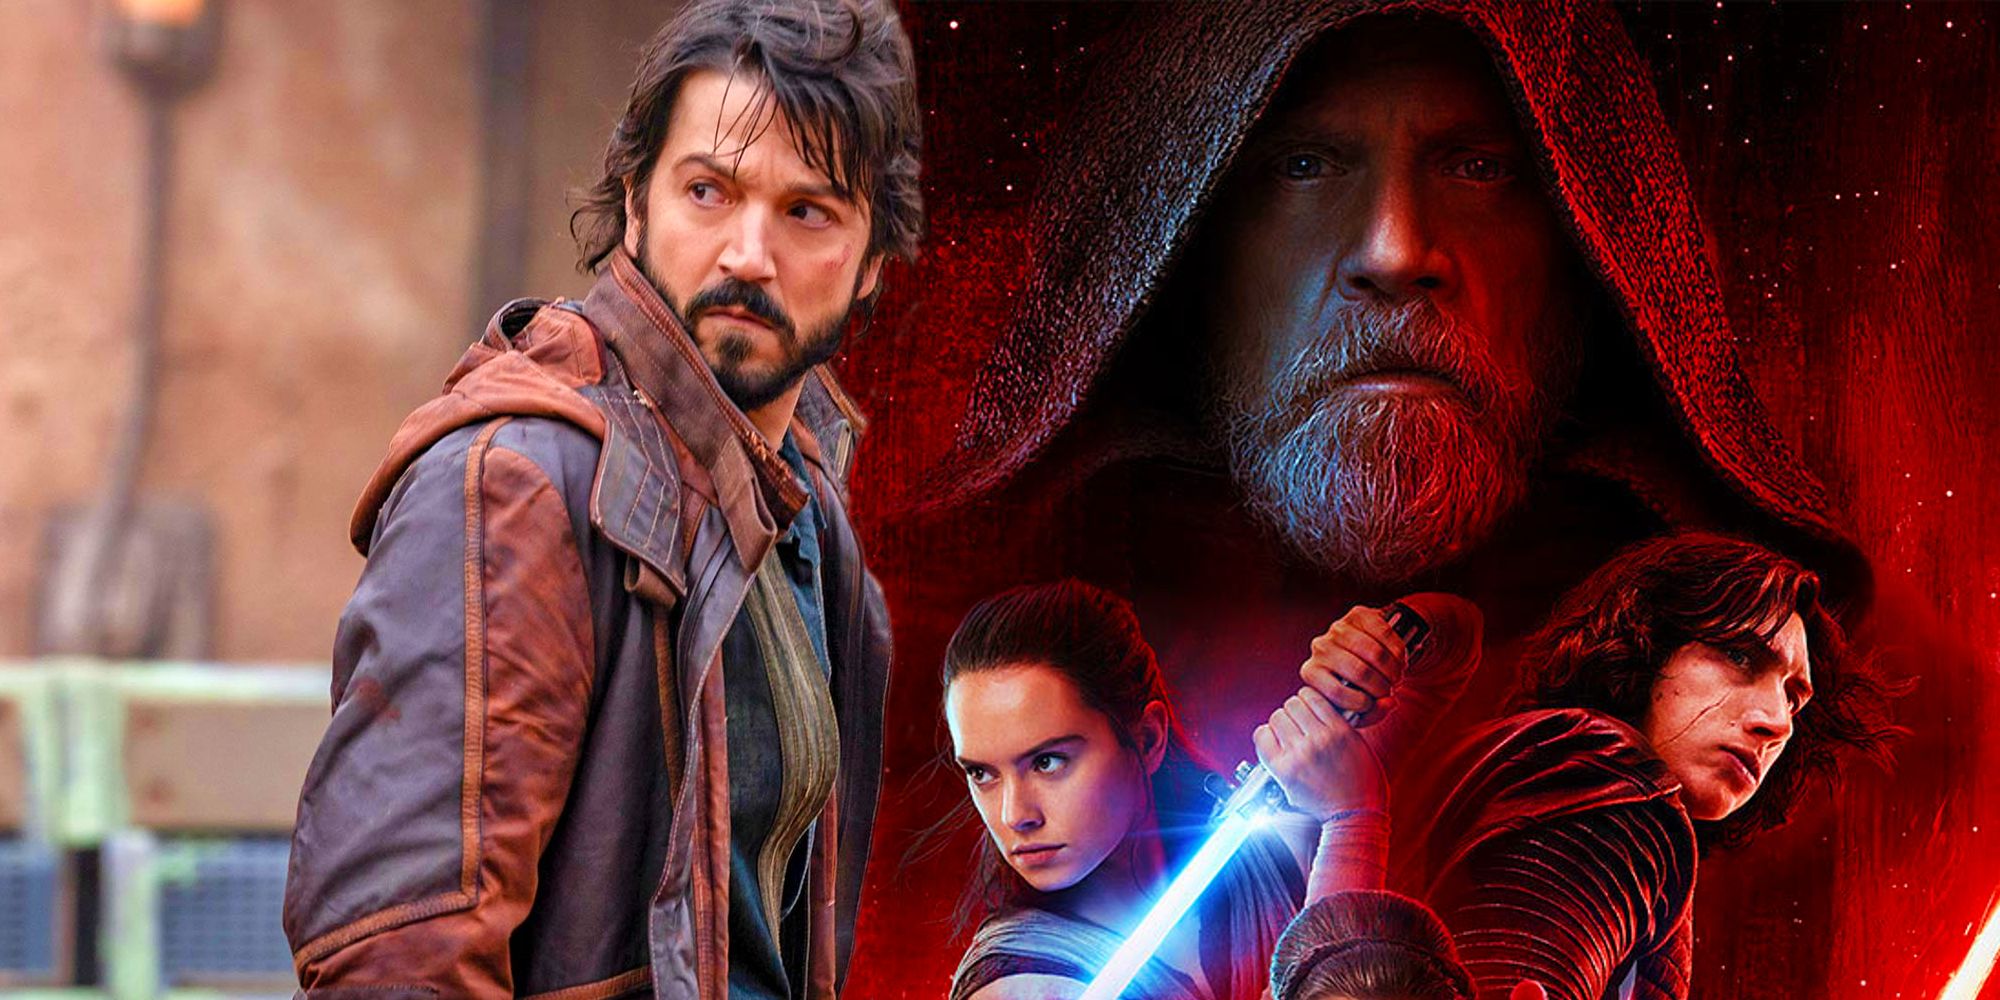 Andor May Truly Be Breaking Star Wars' Jedi, Sith & Force Obsession